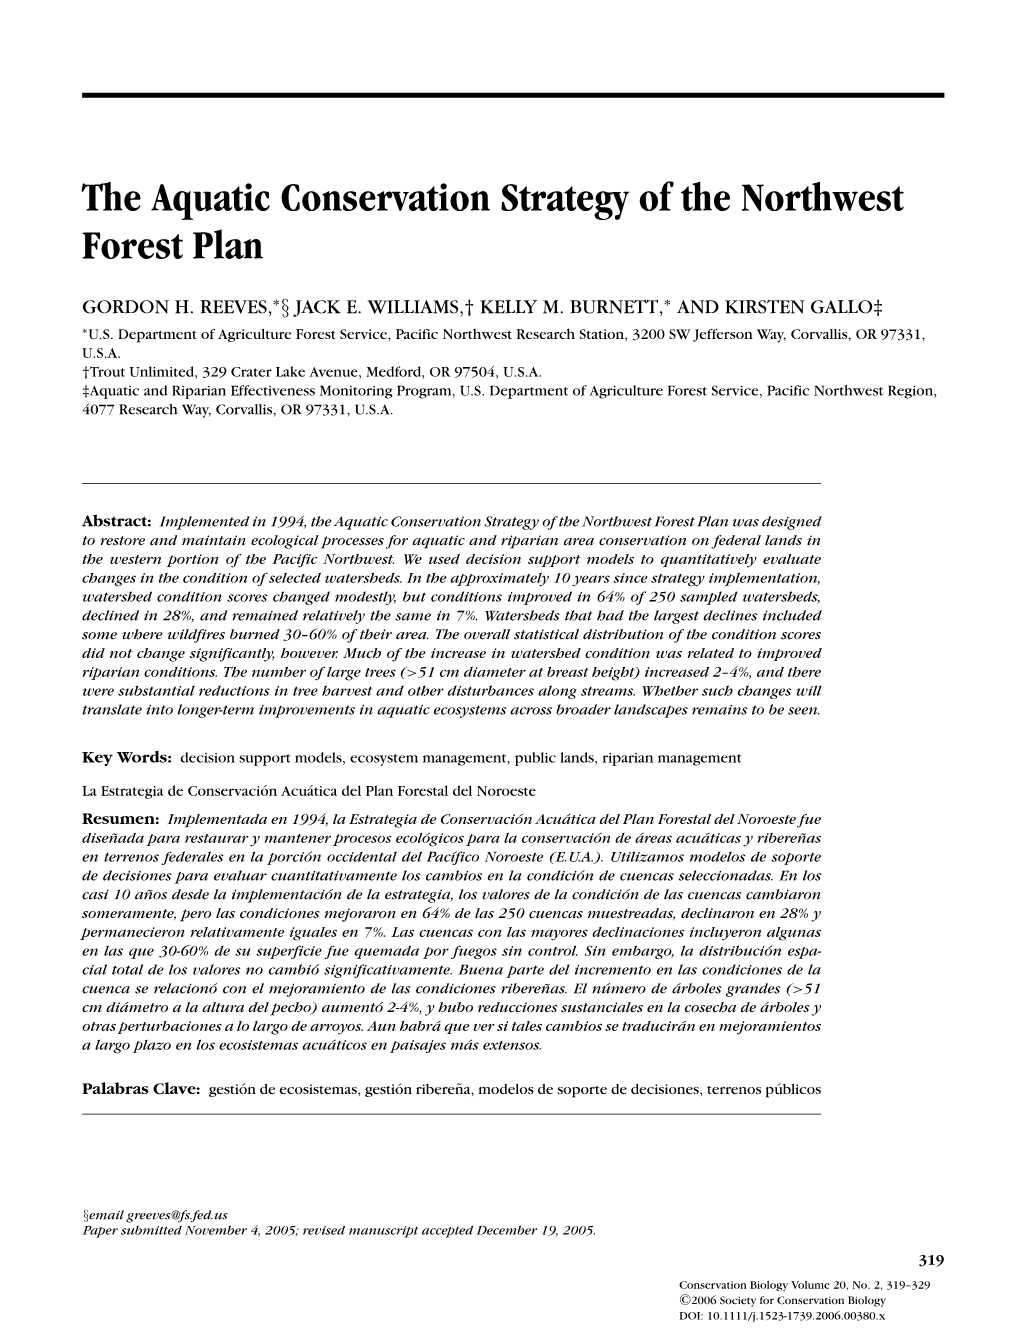 The Aquatic Conservation Strategy of the Northwest Forest Plan